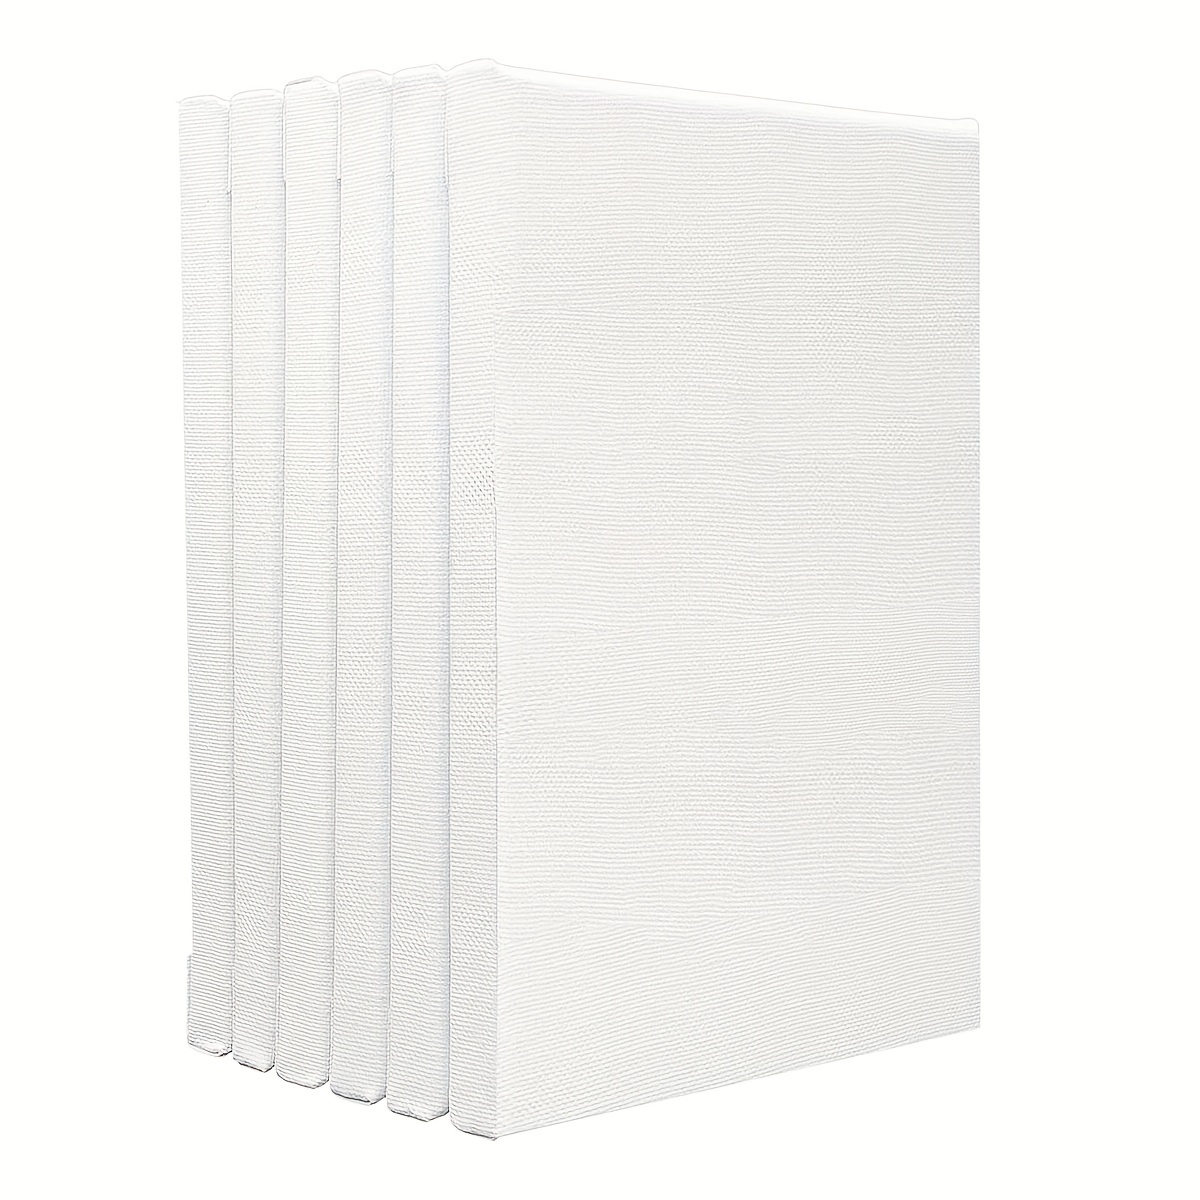 Artlicious Canvases for Painting - 8 Pack White, 6 x 6 inch Blank Canvas Boards - Stretched Art Panels to Use with Oil and Acrylic Paint - Art